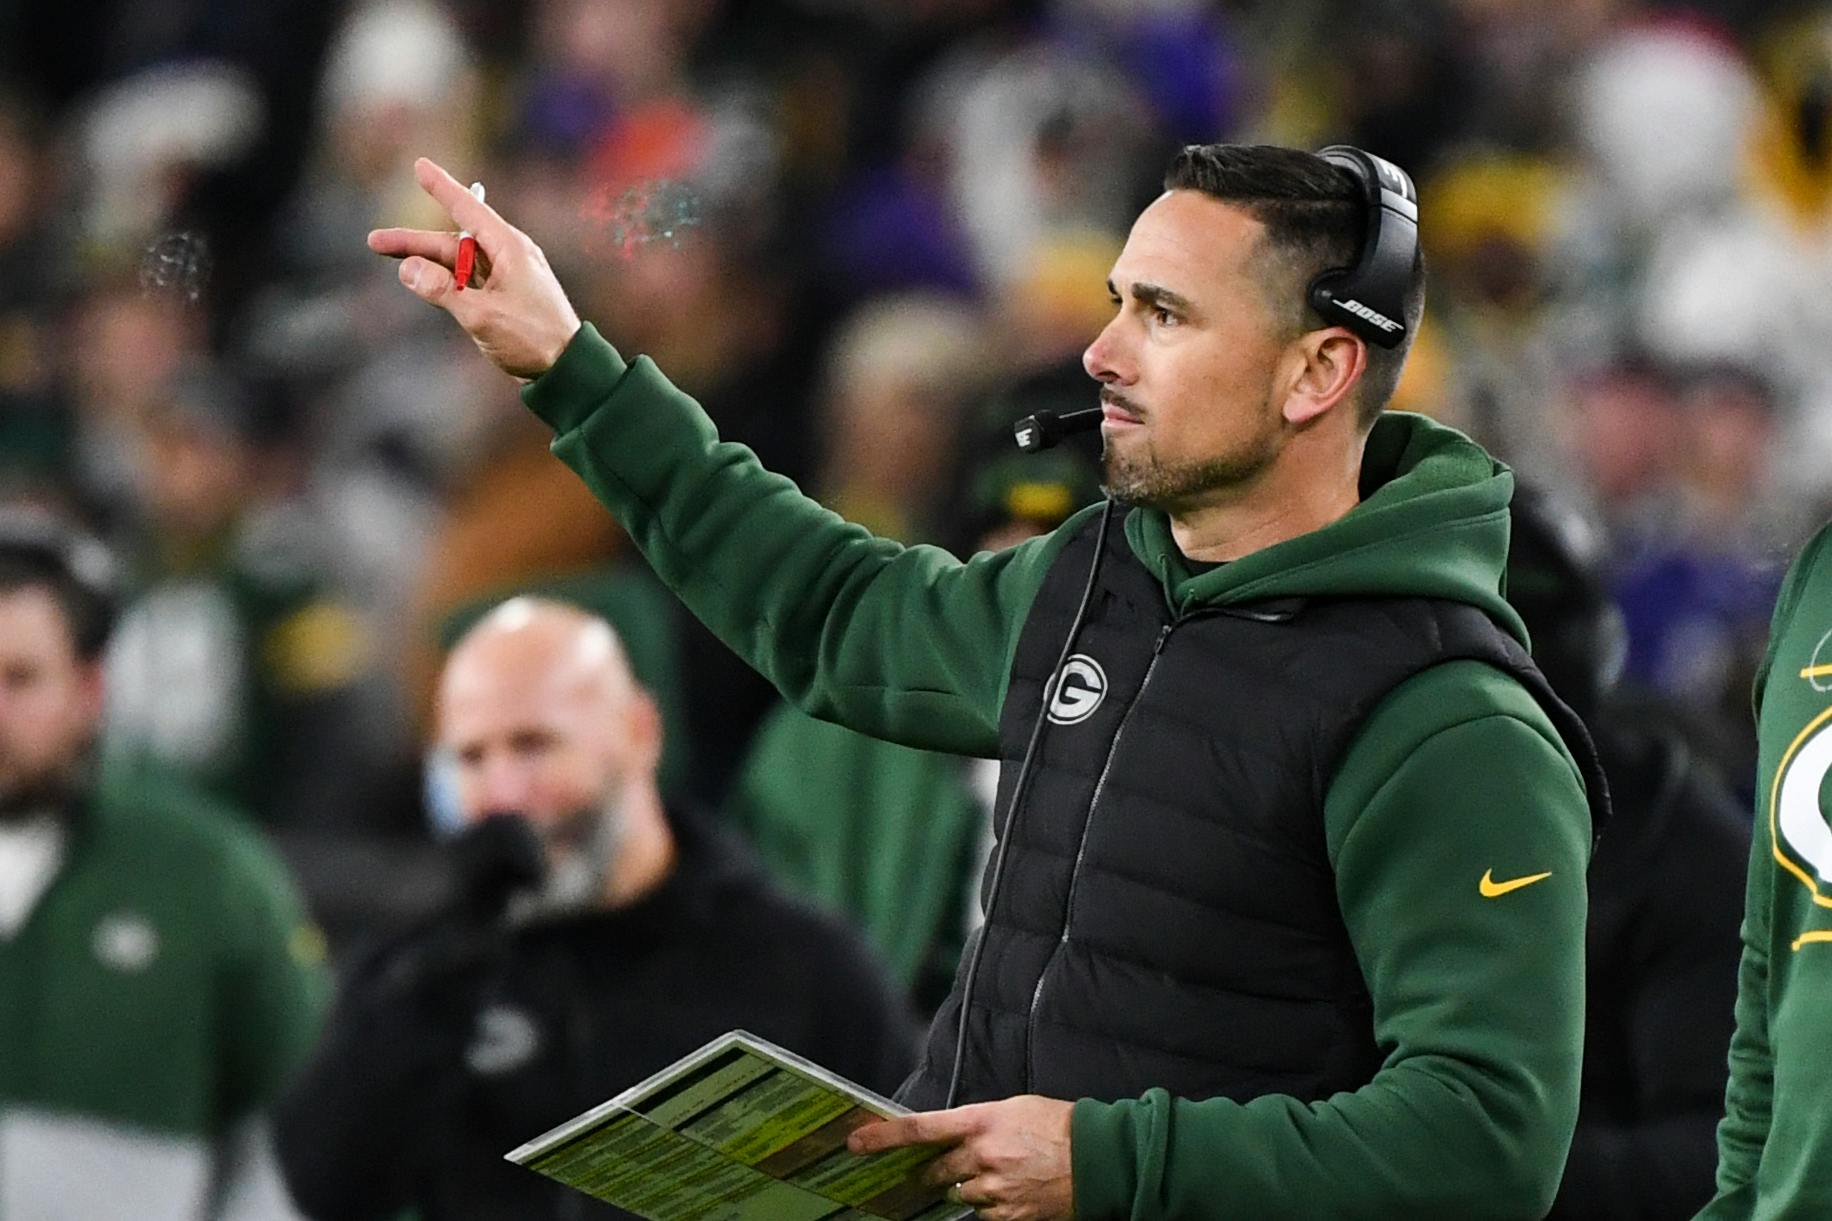 Victory doesn't get away when Matt LaFleur's Packers get more turnovers than they give | Star Tribune